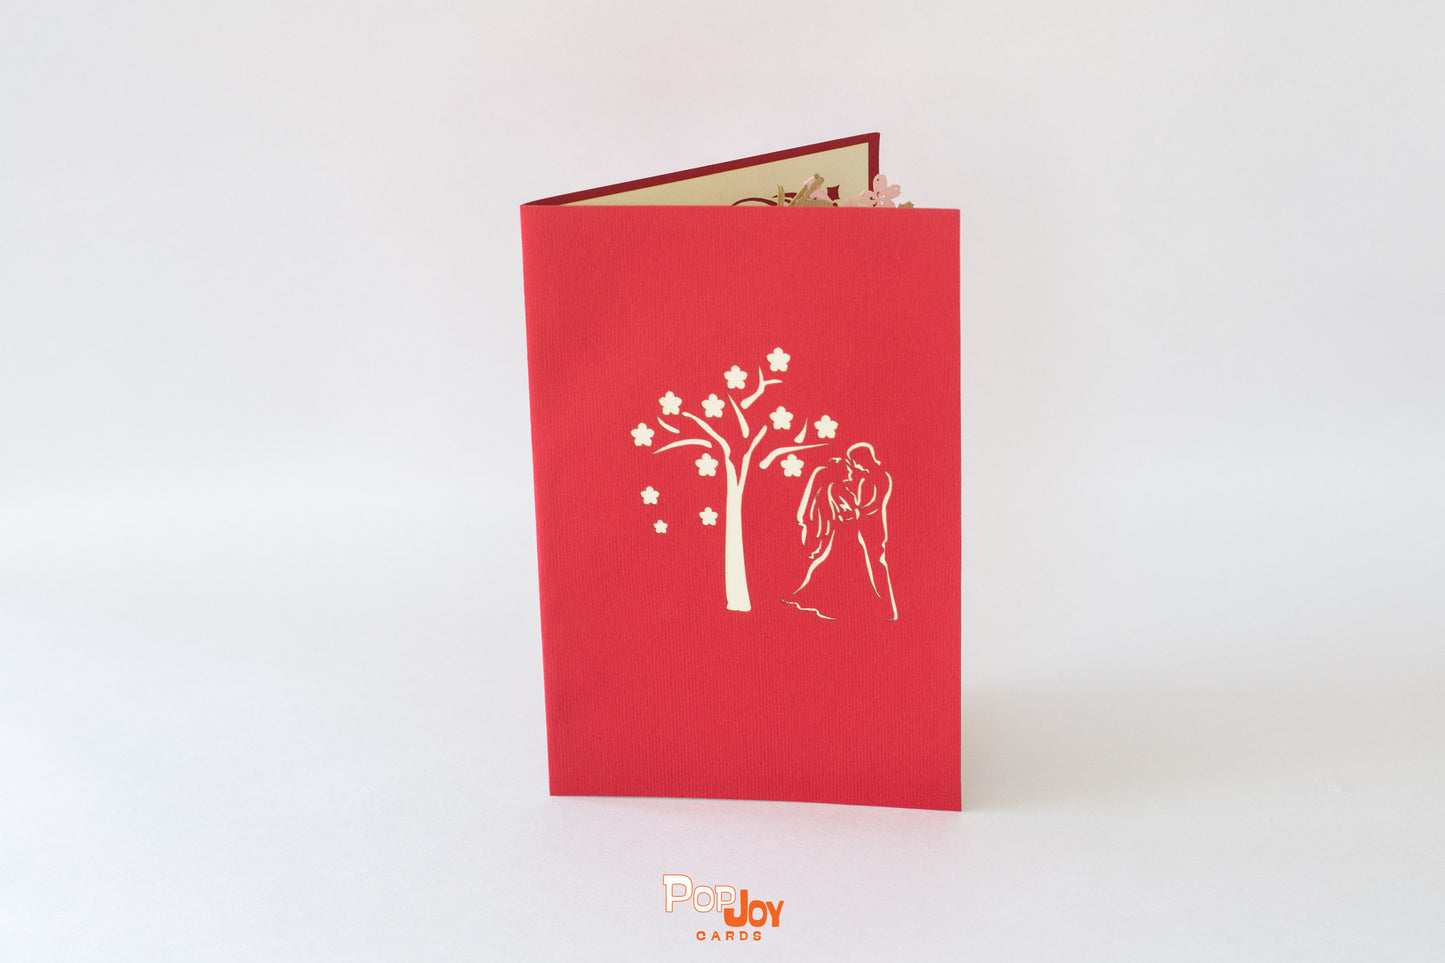 Red card showing cherry blossom tree and couple on wedding day